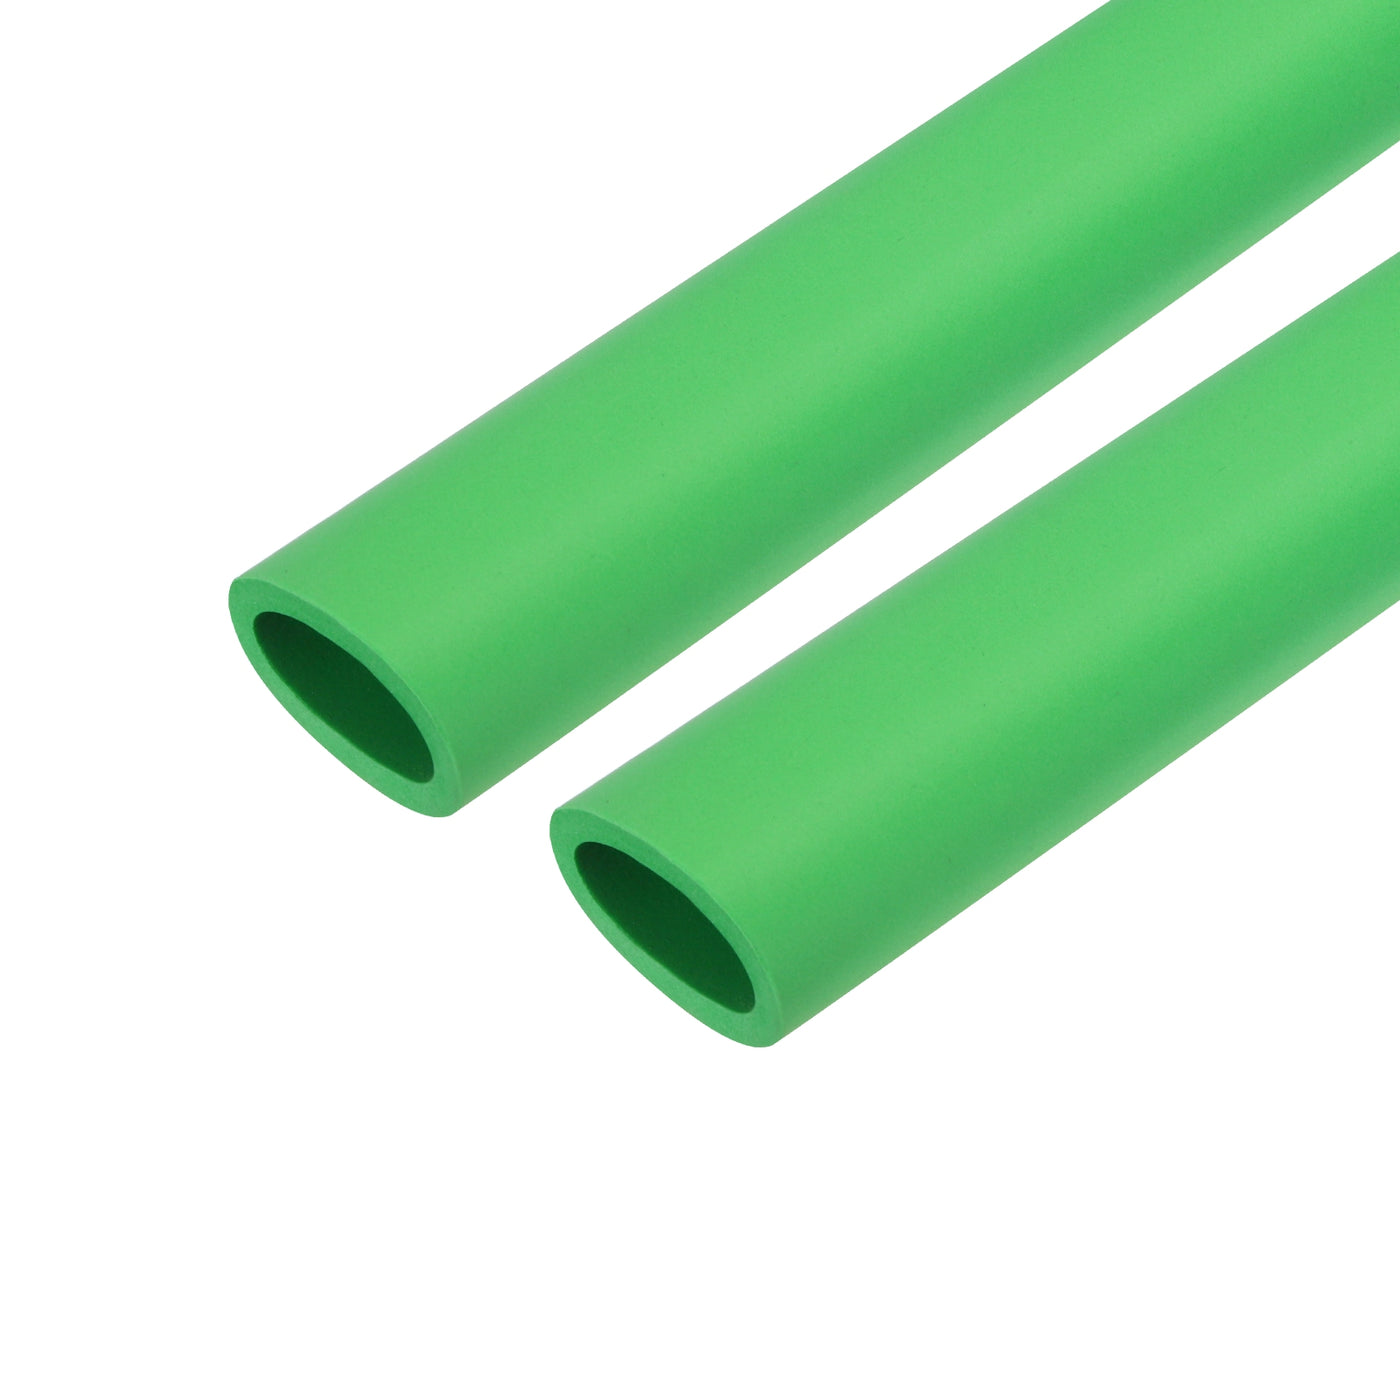 uxcell Uxcell 2pcs 3.3ft Pipe Insulation Tube 28mm ID 38mm OD Foam Tubing for Handle Grip Support, Green